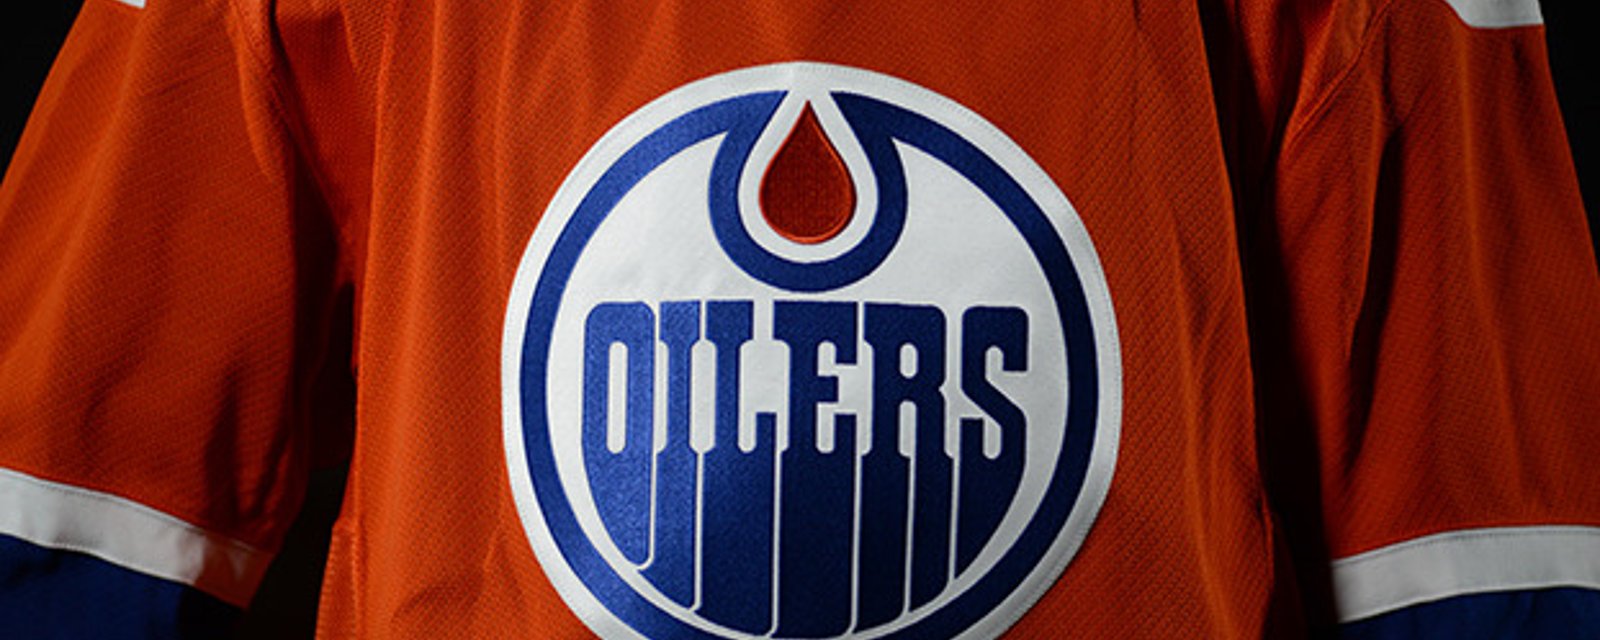 Former Oiler: Time To Move On 